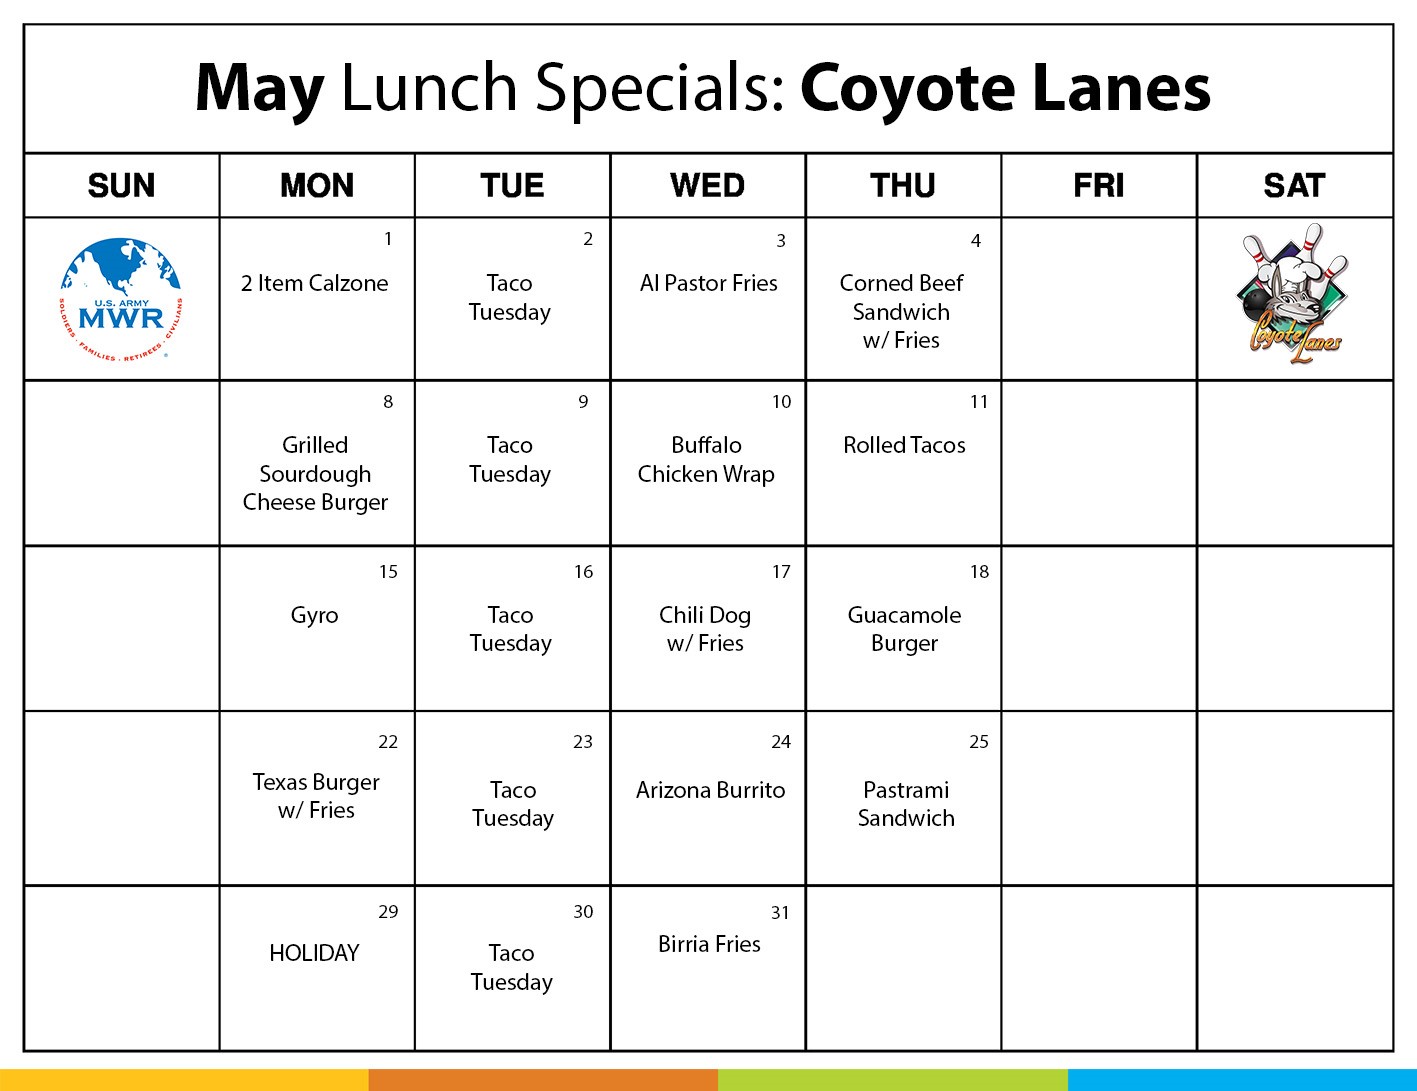 YPG_Coyote Lanes_May Lunch Specials_2023.jpg